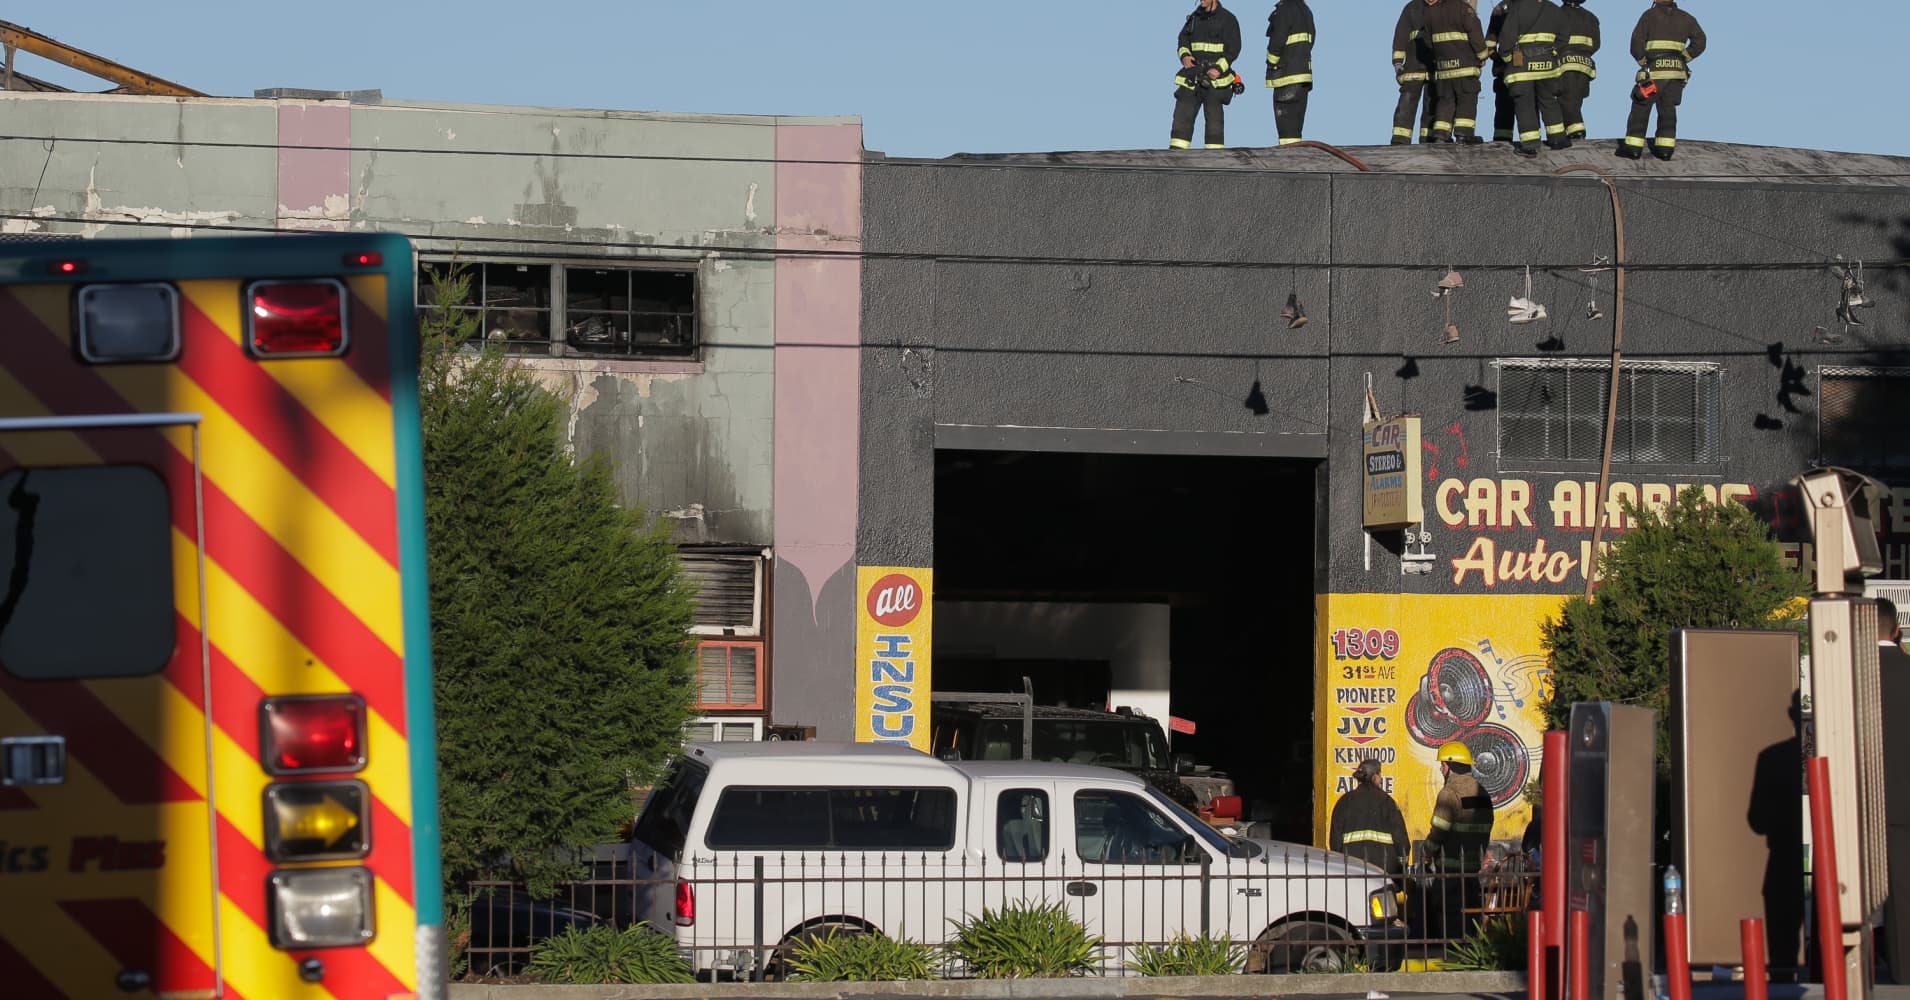 Oakland warehouse party leaves 9 dead in fire, with scores missing - CNBC